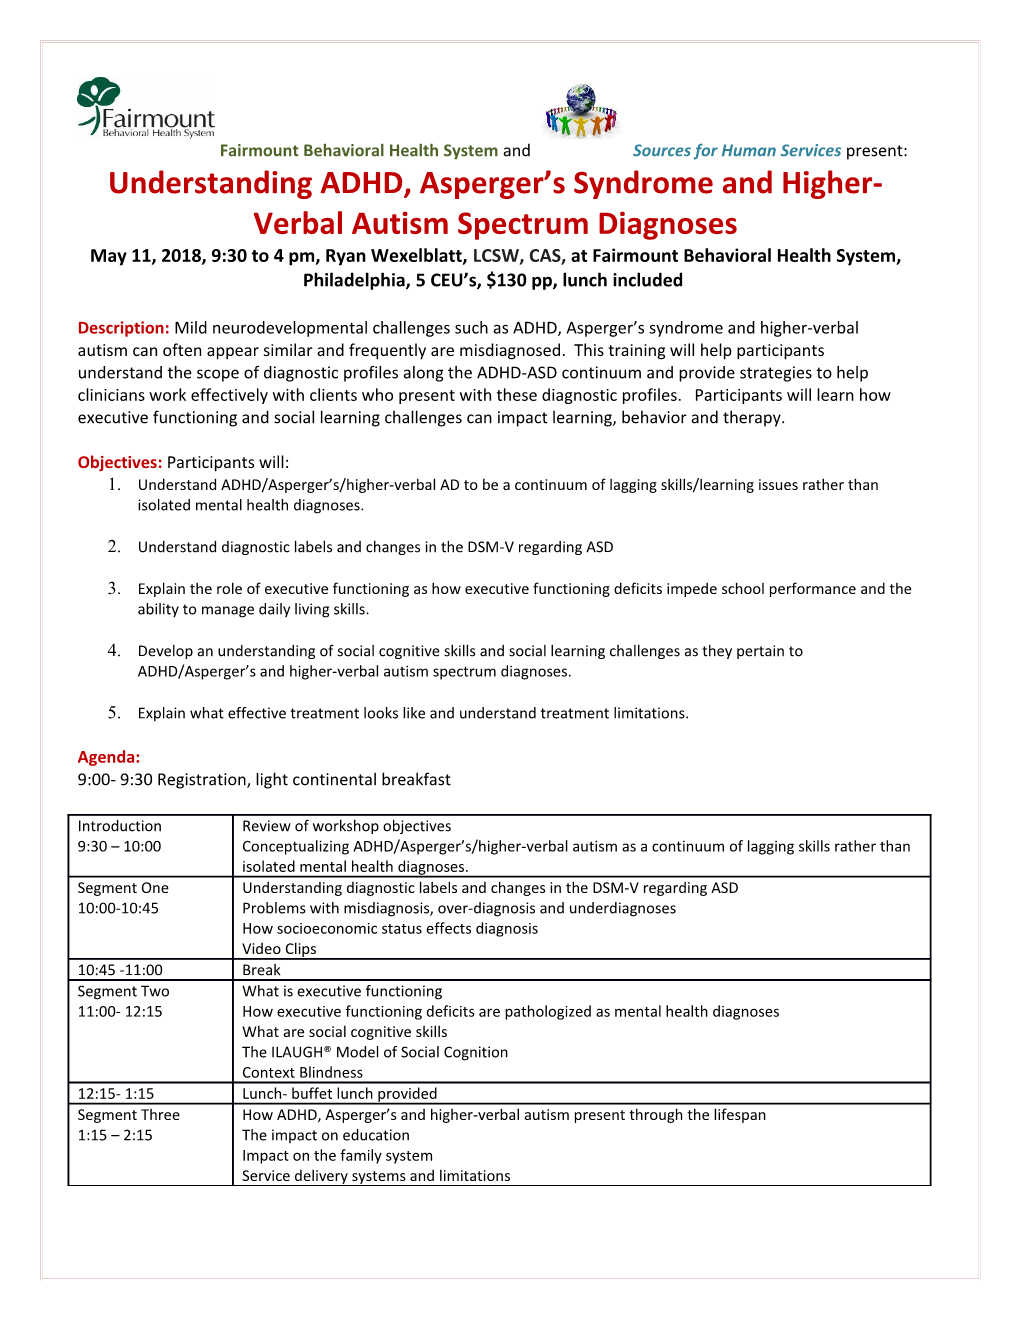 Understanding ADHD, Asperger S Syndrome and Higher-Verbal Autism Spectrum Diagnoses